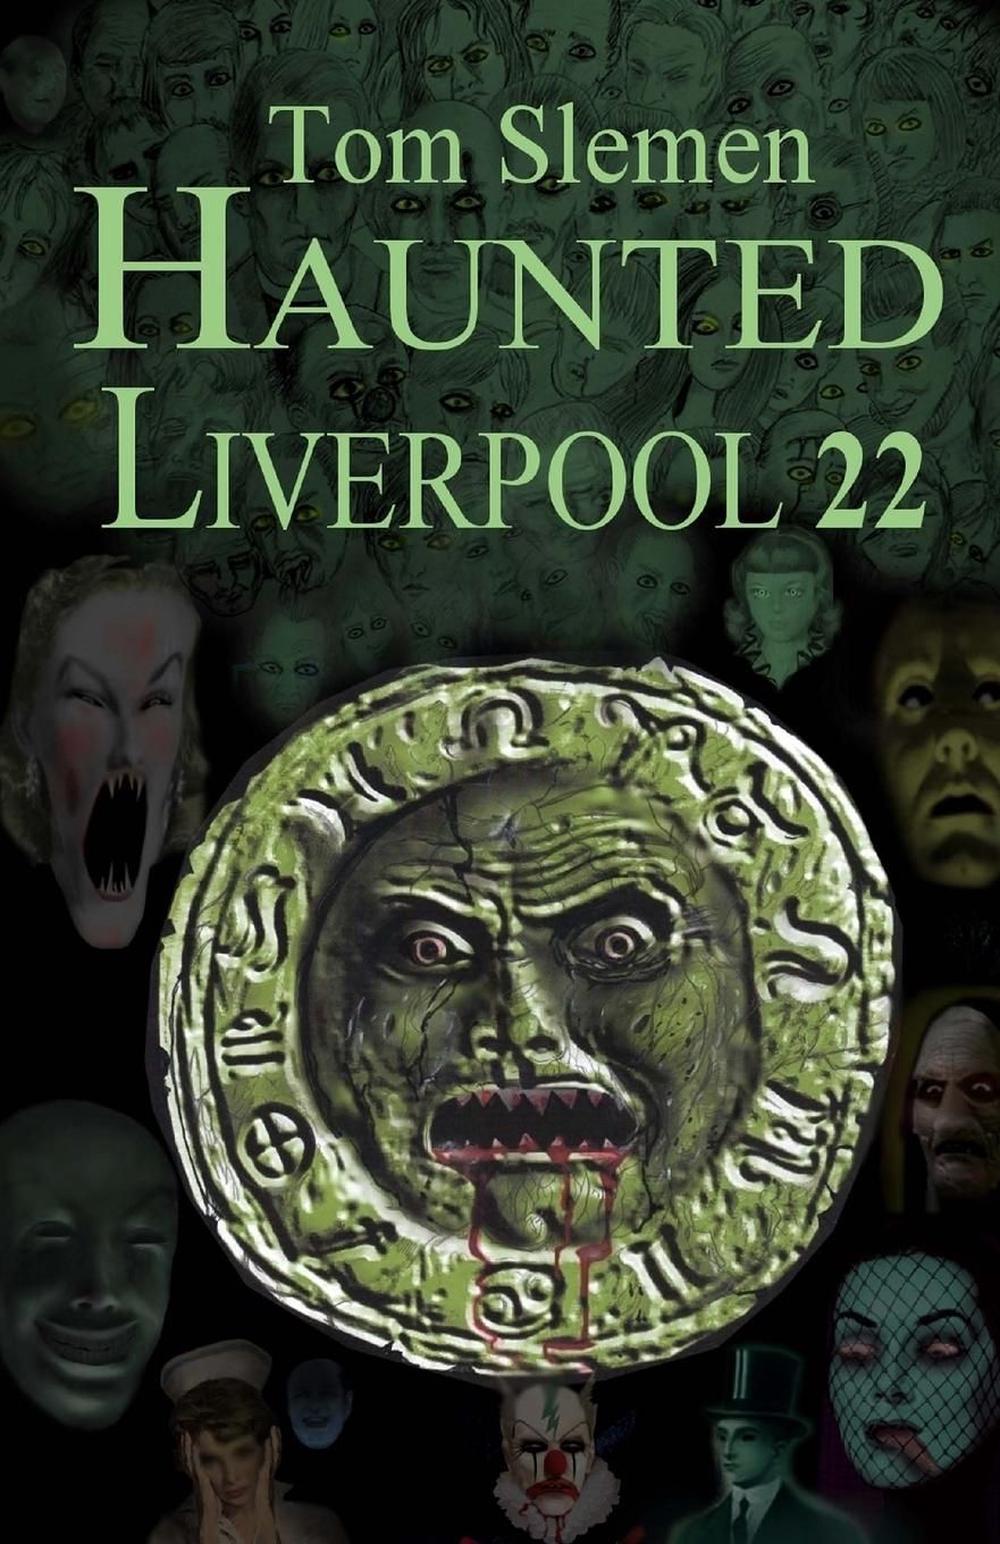 Haunted Liverpool 22 by Tom Slemen (English) Paperback Book Free